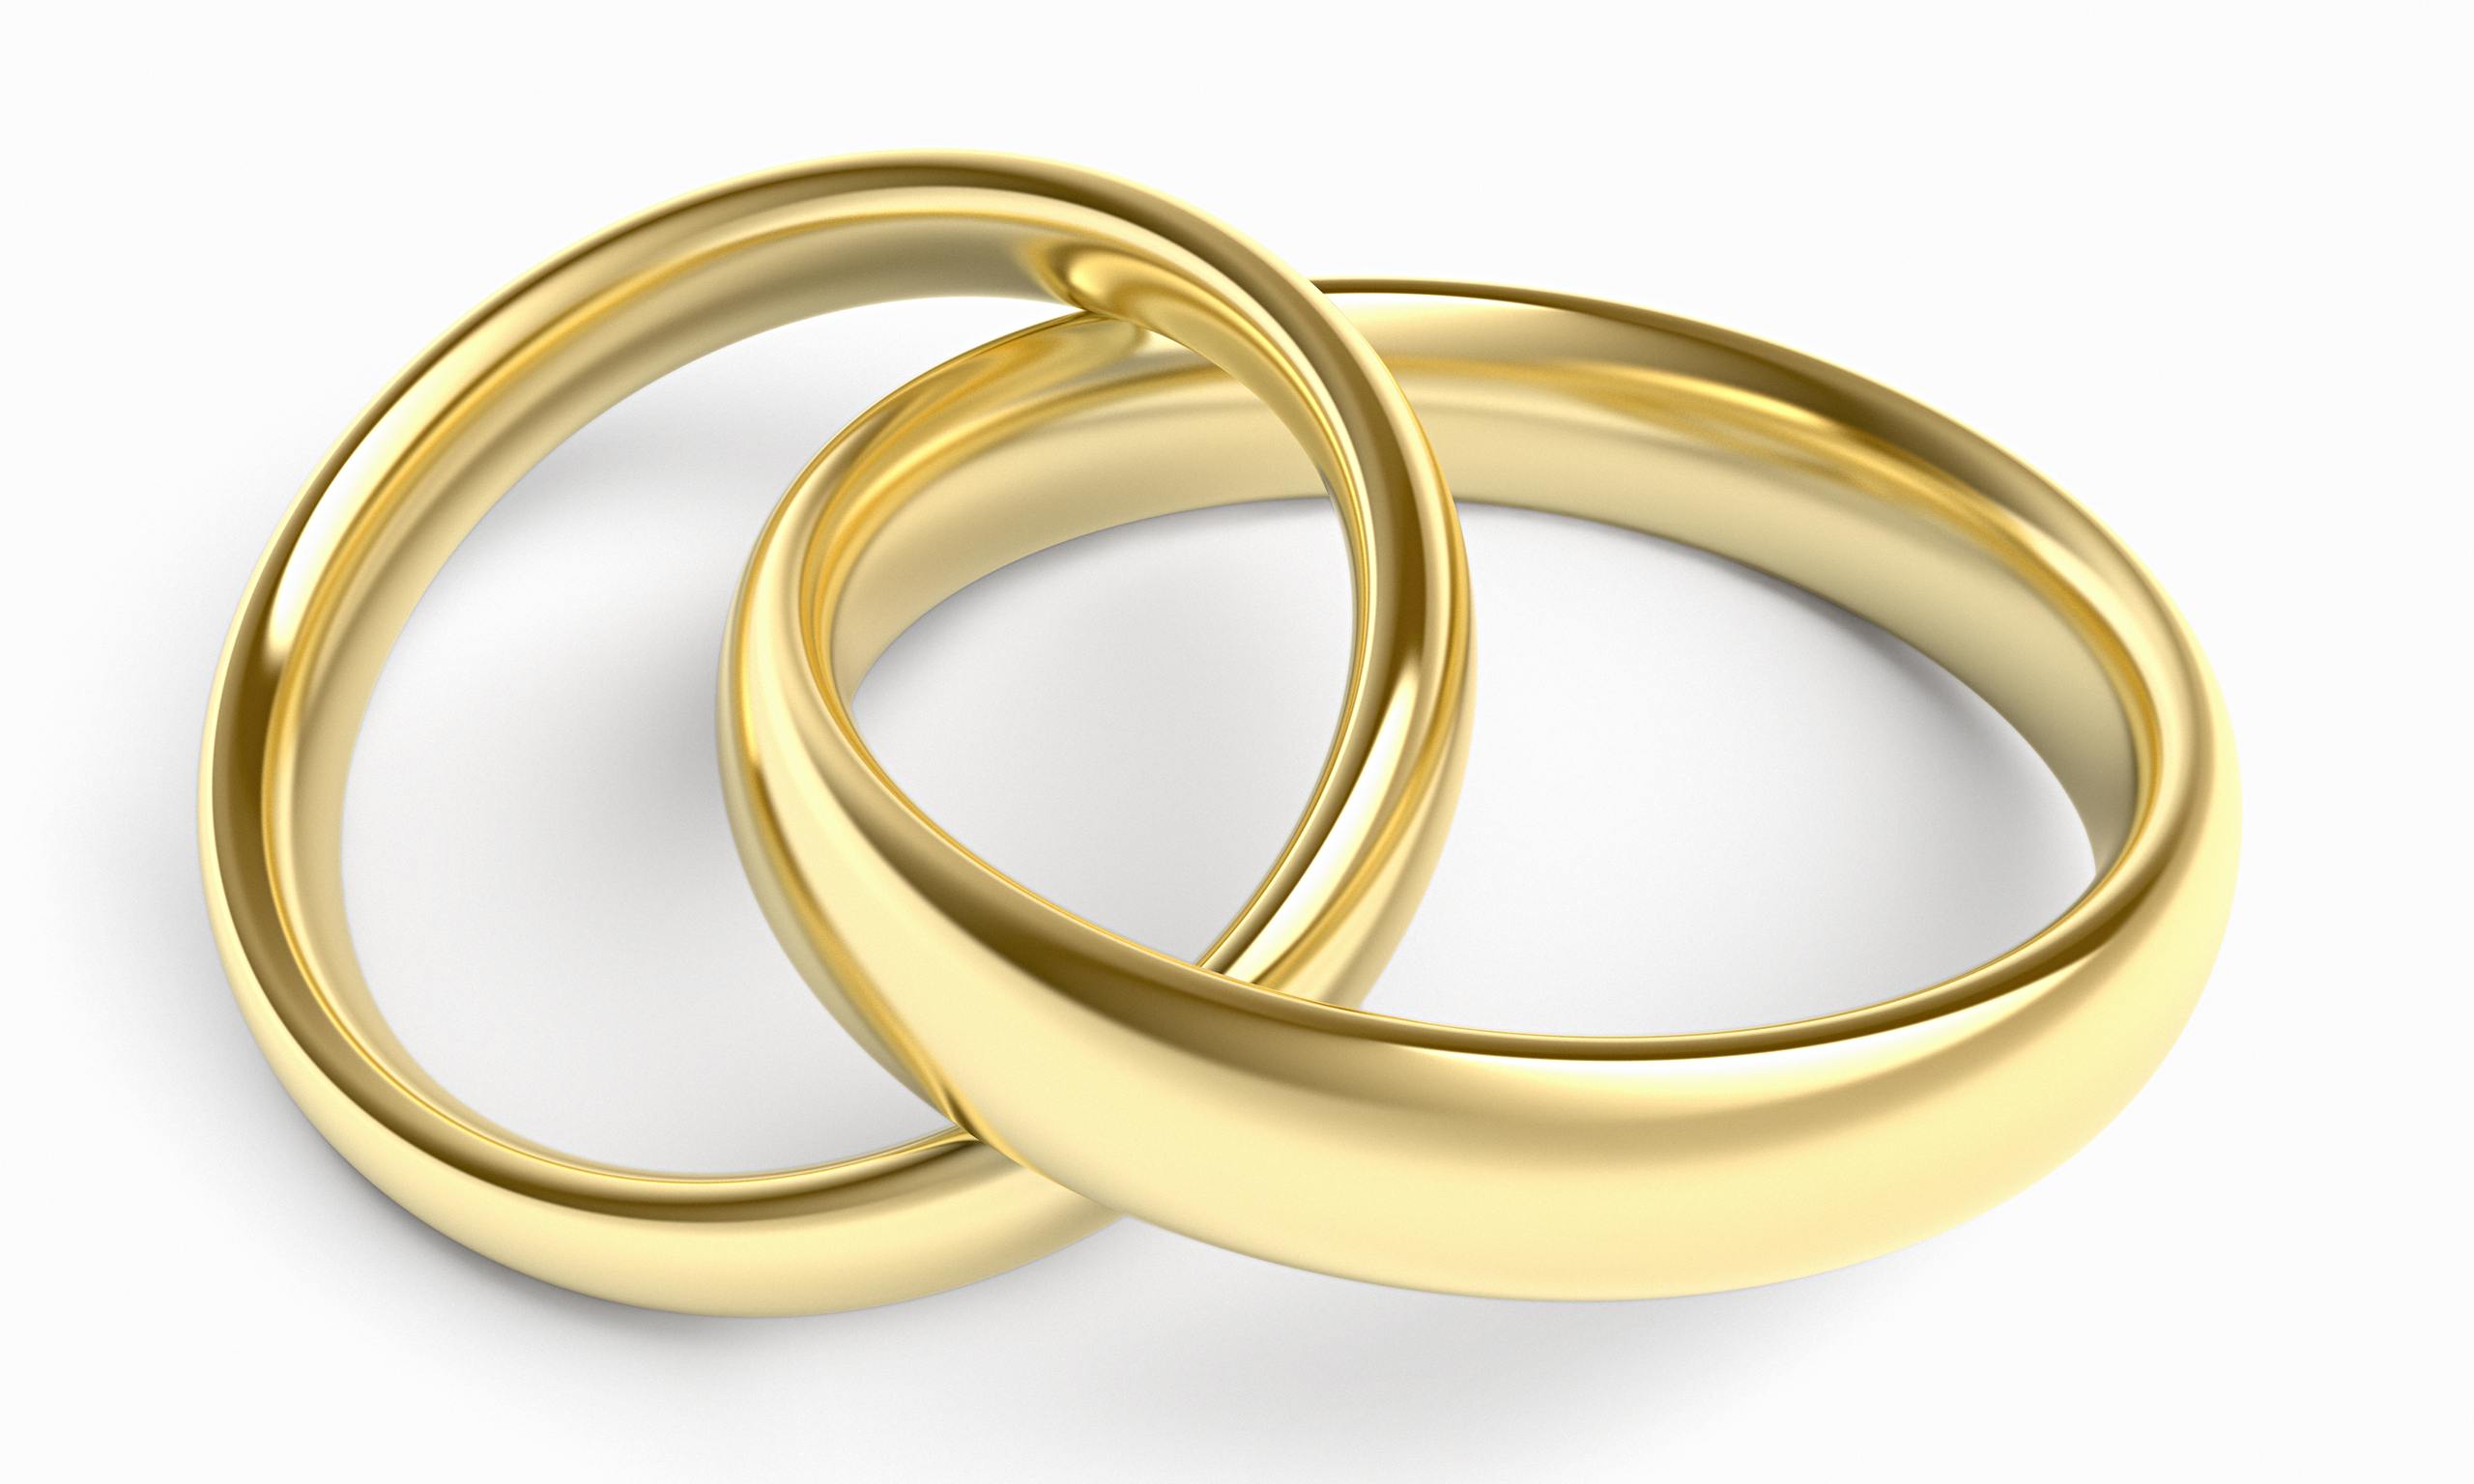 five golden rings clipart - photo #42